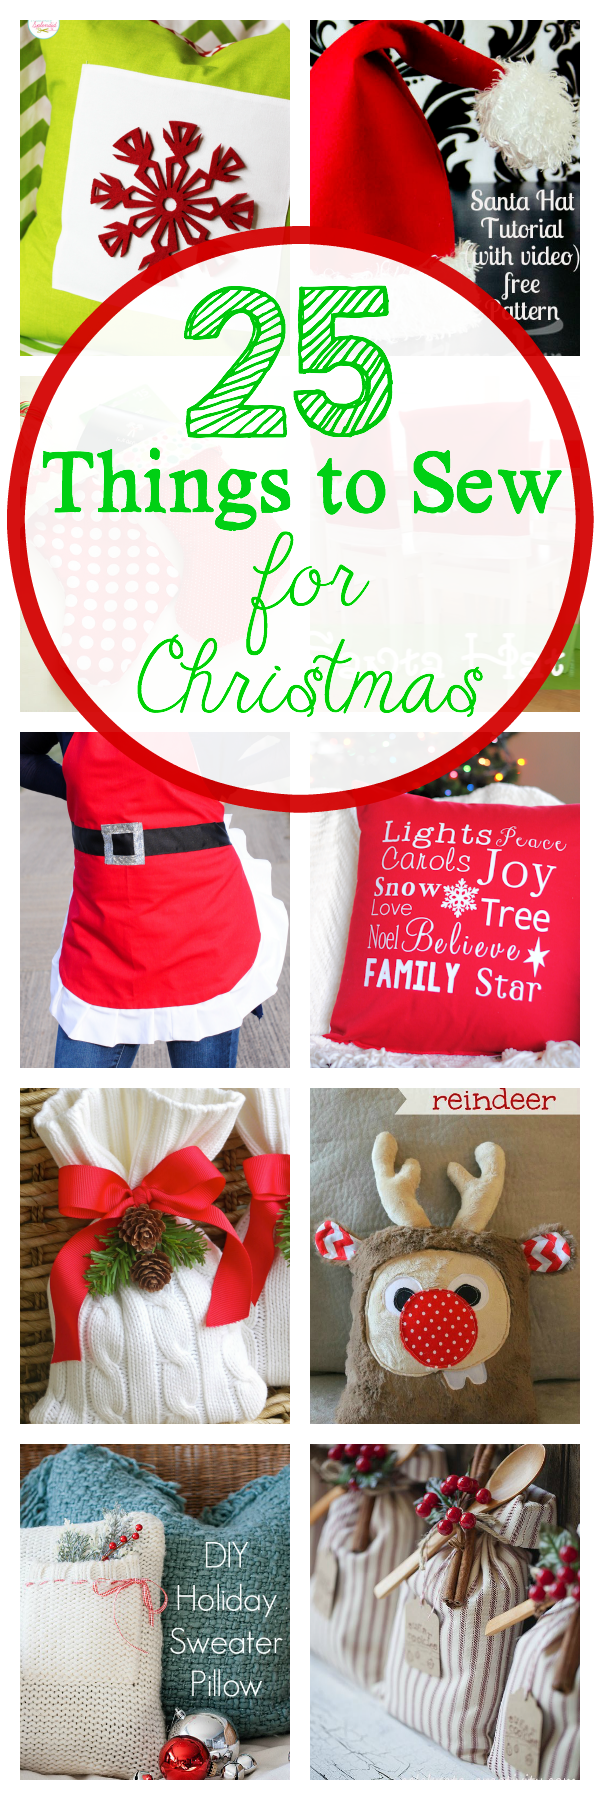 25 great things to sew for Christmas from stockings to tree skirts, aprons, gifts and more via @crazylittleproj